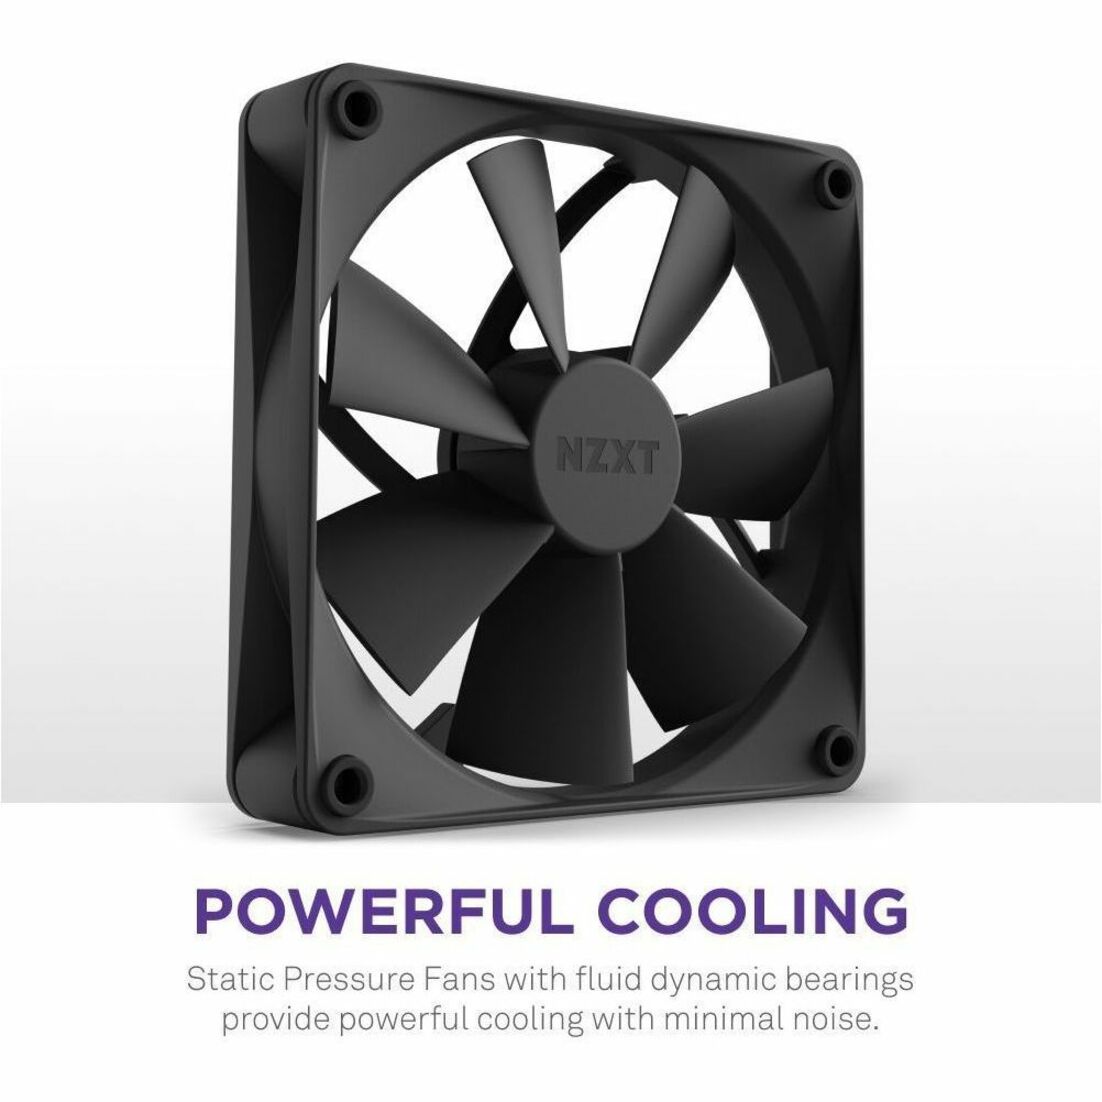 NZXT RL-KN24E-B1 Kraken Elite 240 240mm AIO Liquid Cooler with LCD Display, Powerful Cooling Solution for Gaming PCs